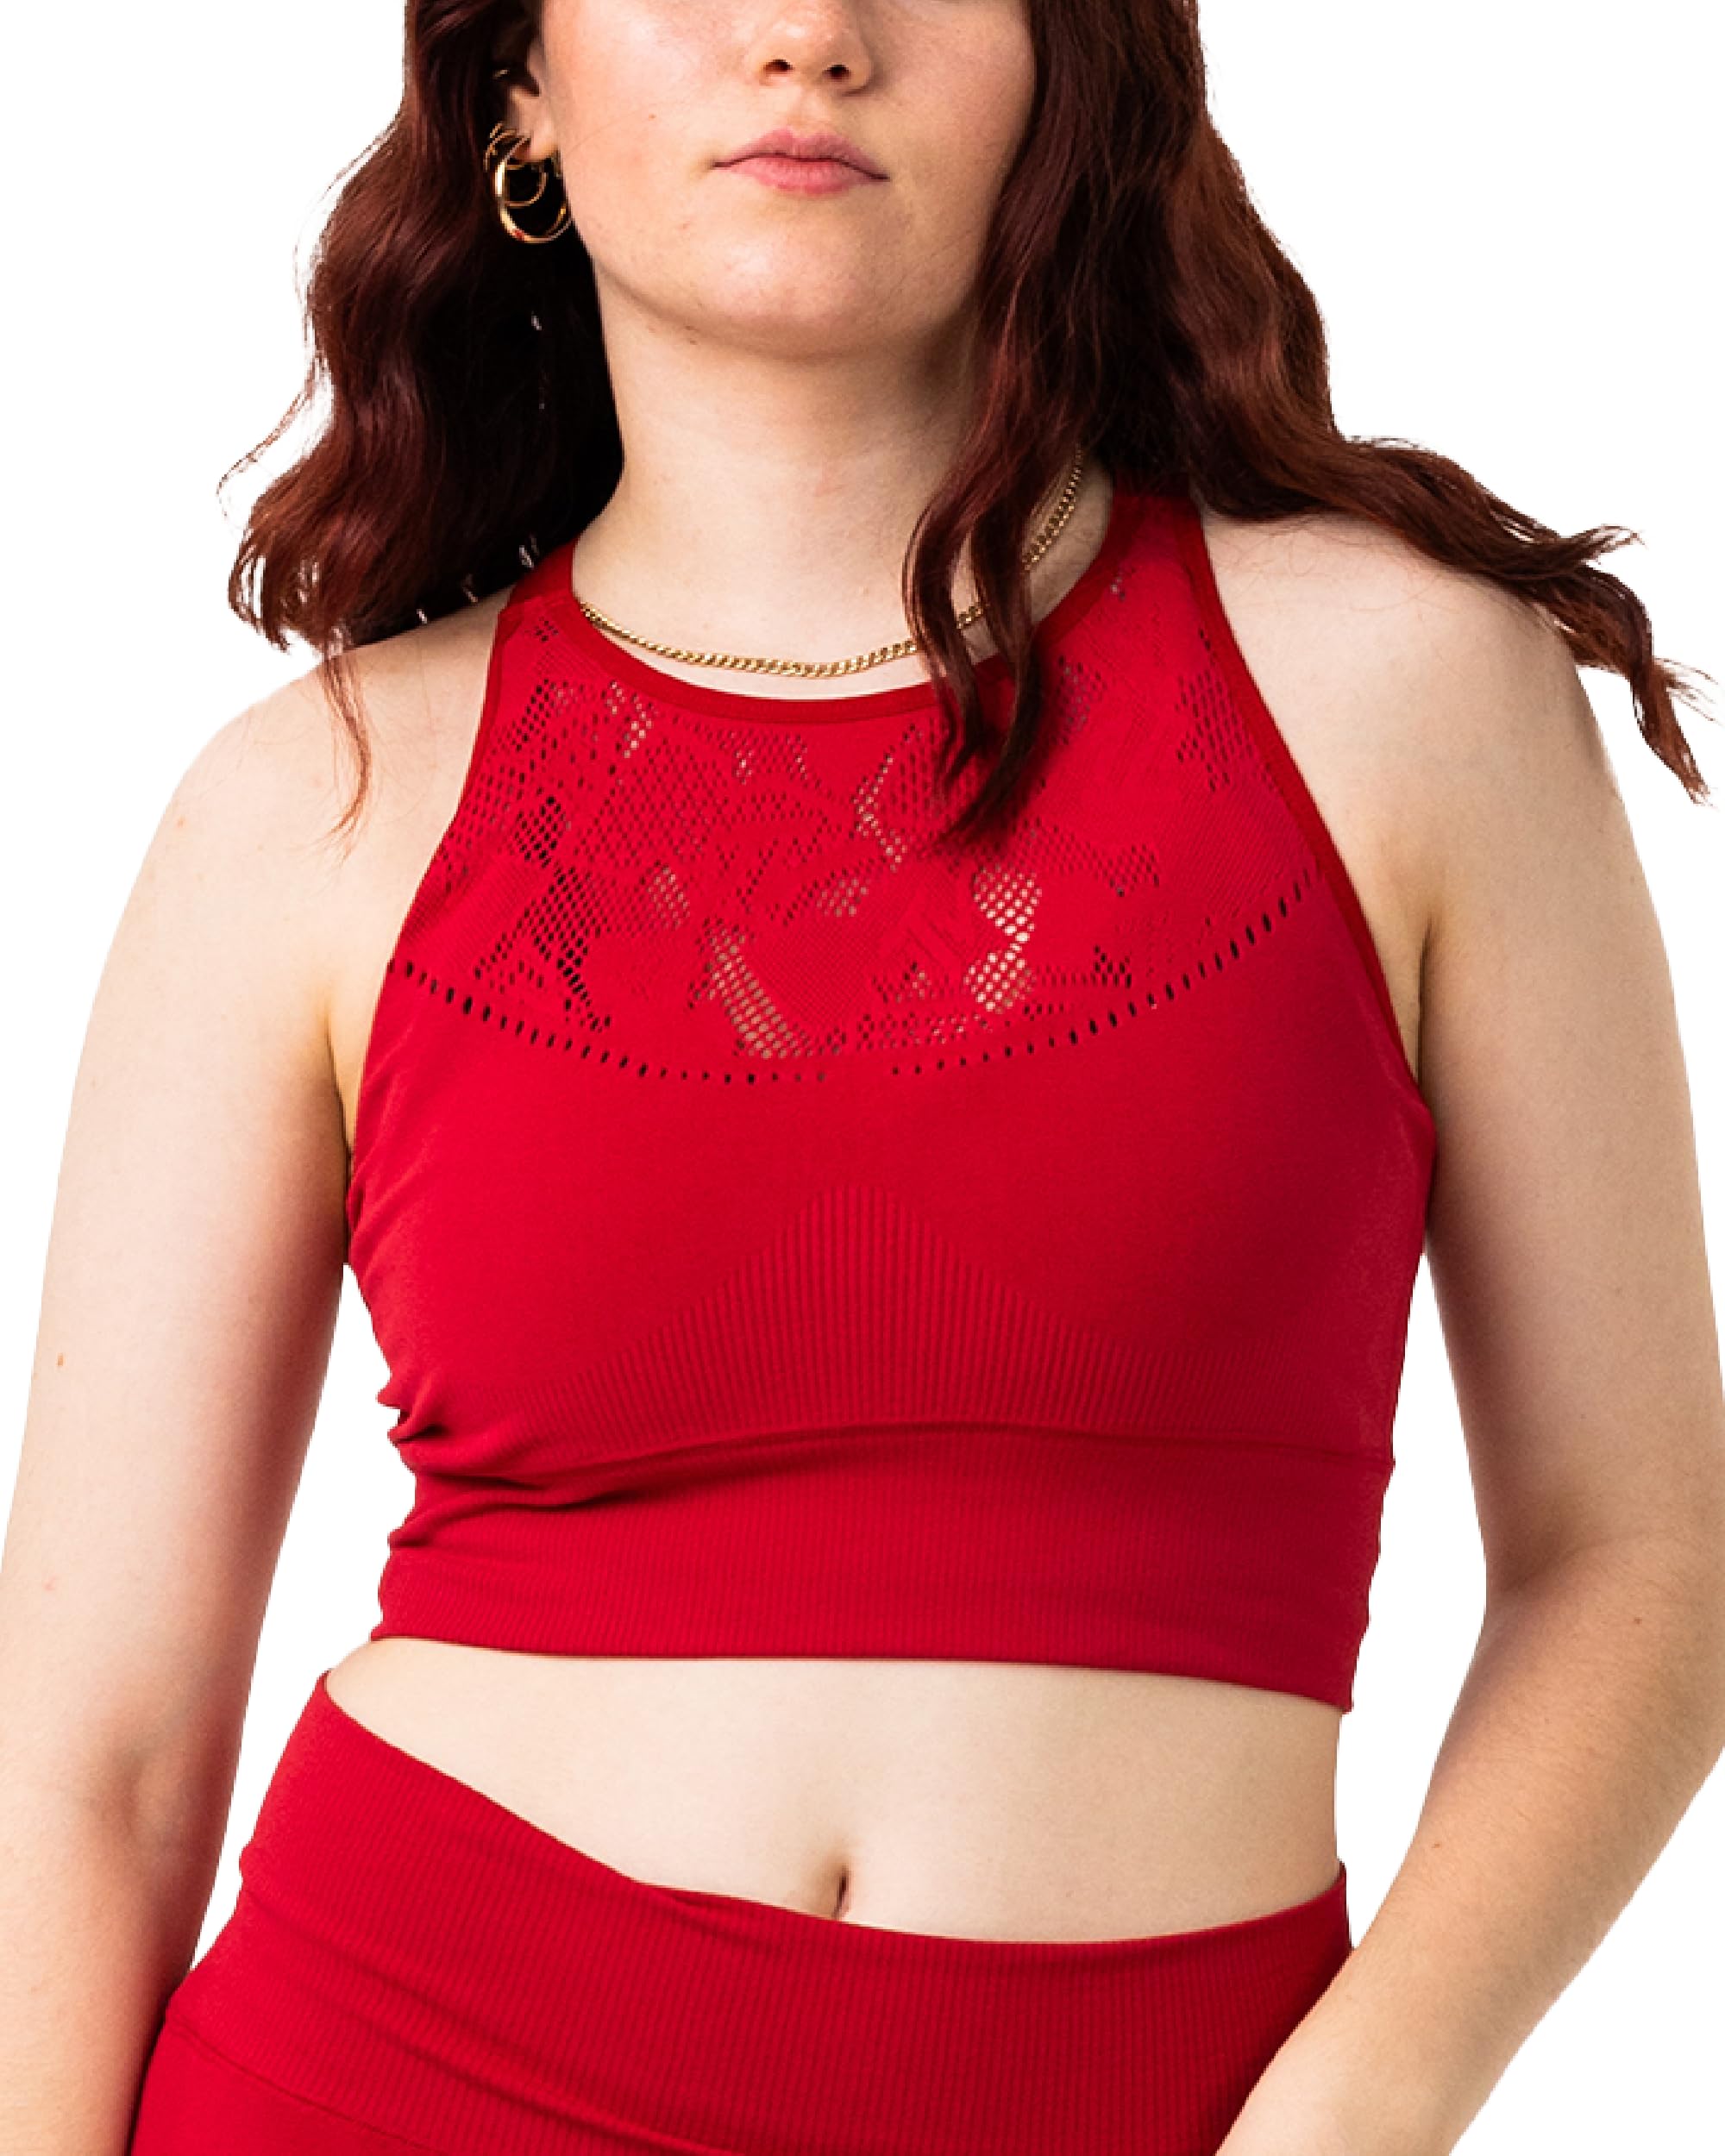 MTV Womens Standard Sports Bra Longline Seamless Athletic Workout Top Exercise Gym Training Criss Cross Back Red LXL